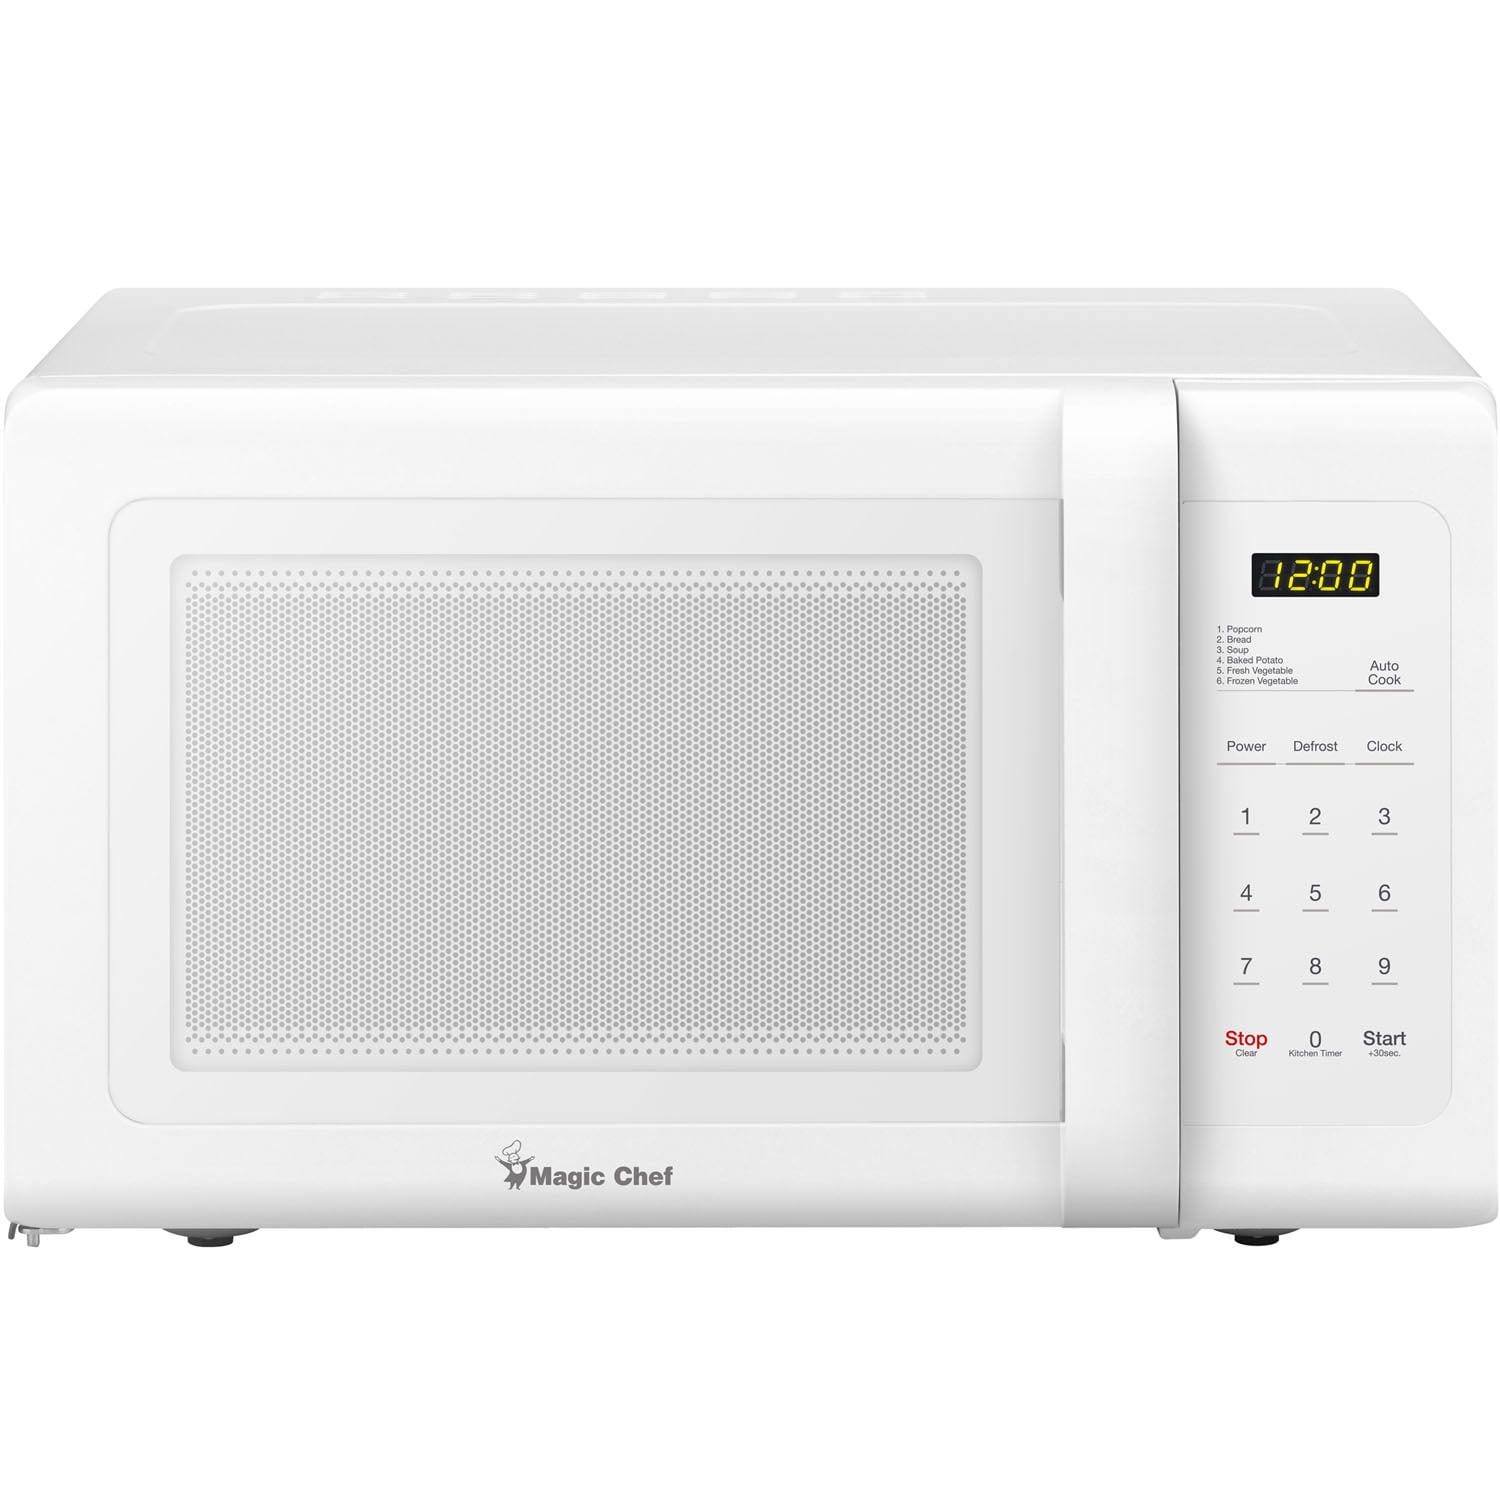 Countertop Small Microwave Oven, 9.5 Inch, White